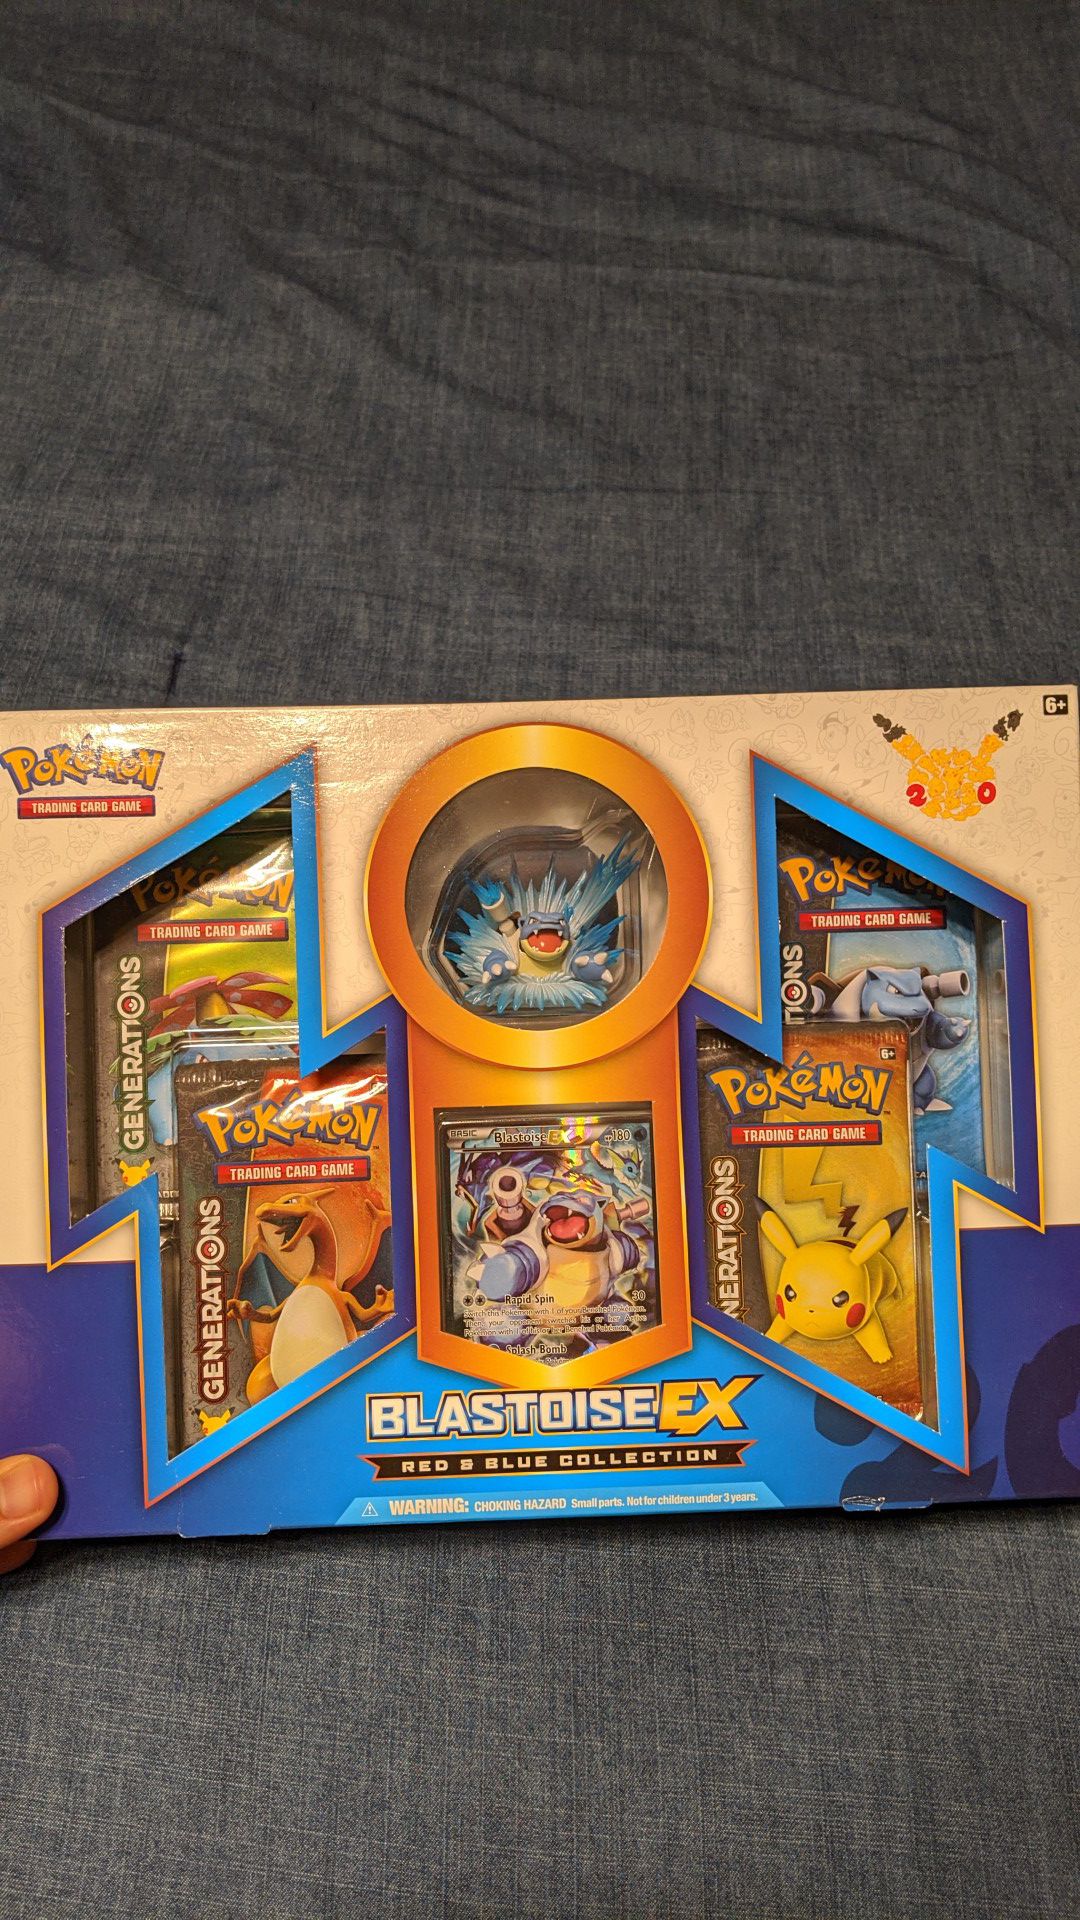 Pokemon Red and Blue Collections: Blastoise